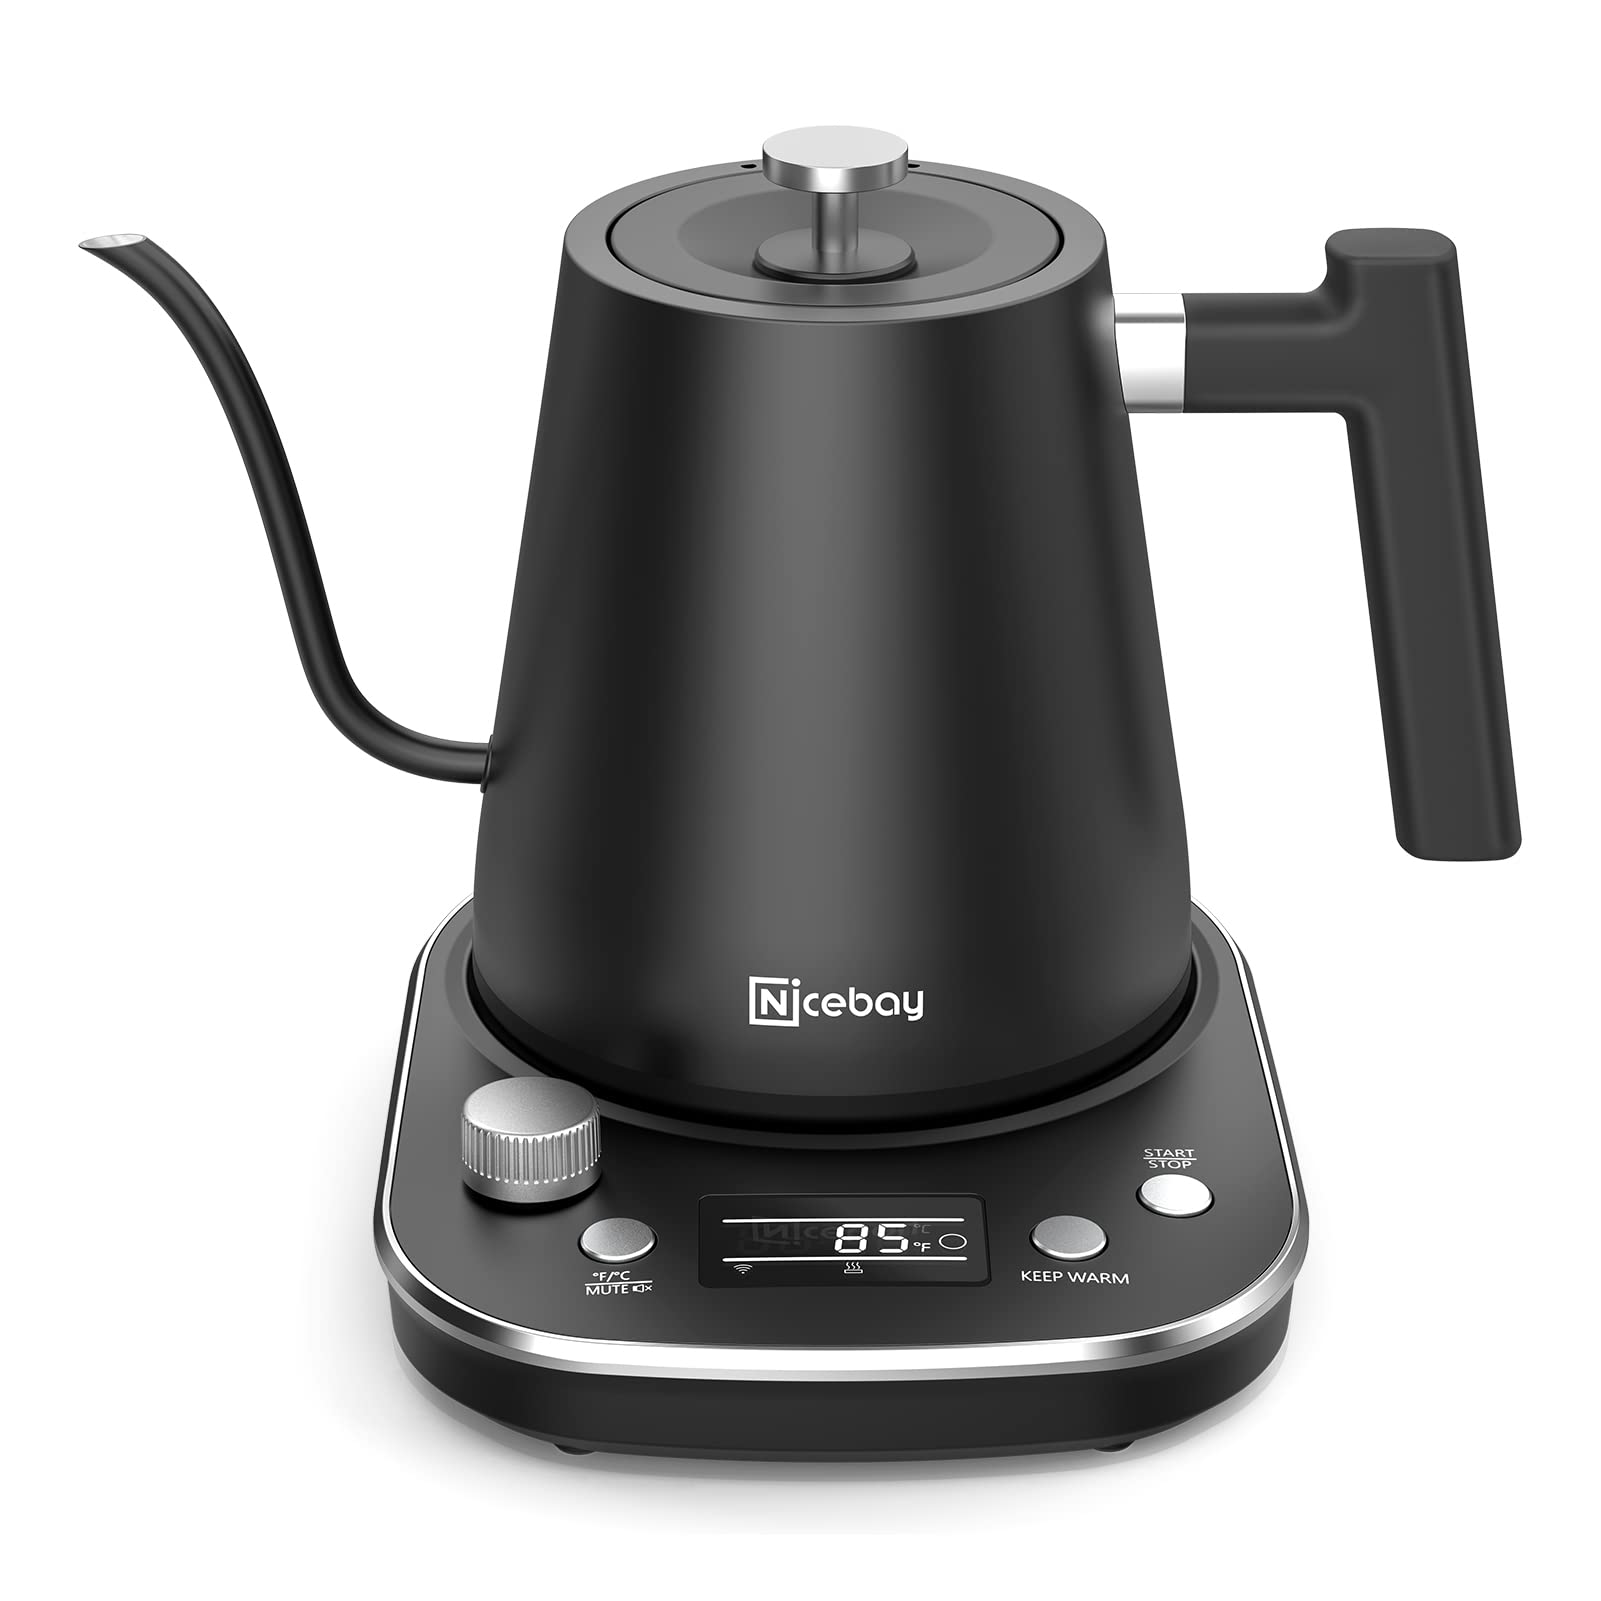 Nicebay Electric Gooseneck Kettle, Electric Kettle with Heating Base with Buttons and LED Display, Pure Stainless Steel Inner Electric Tea Kettle, 1200W Fast Heating, Pour Over Coffee Kettle, 0.8L